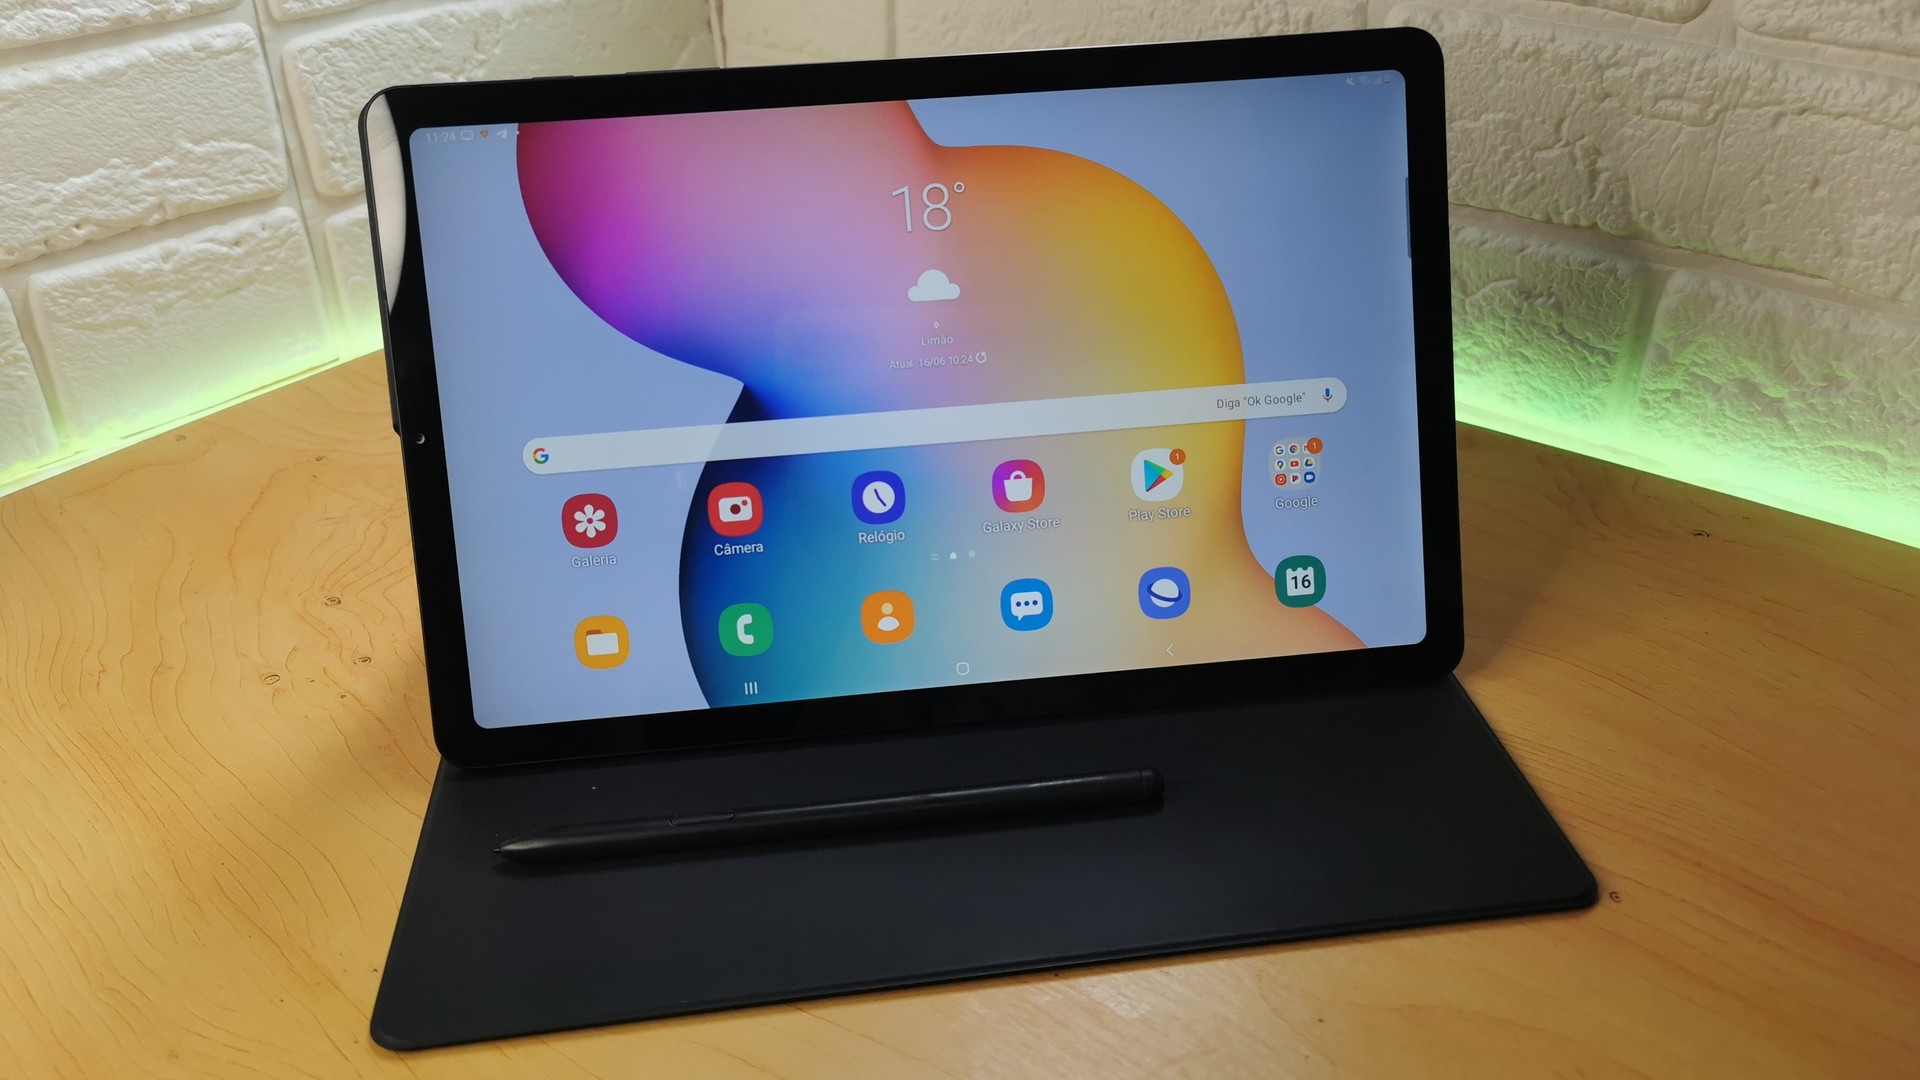 Samsung Galaxy Tab S6 Lite gets January 2022 security patch thumbnail